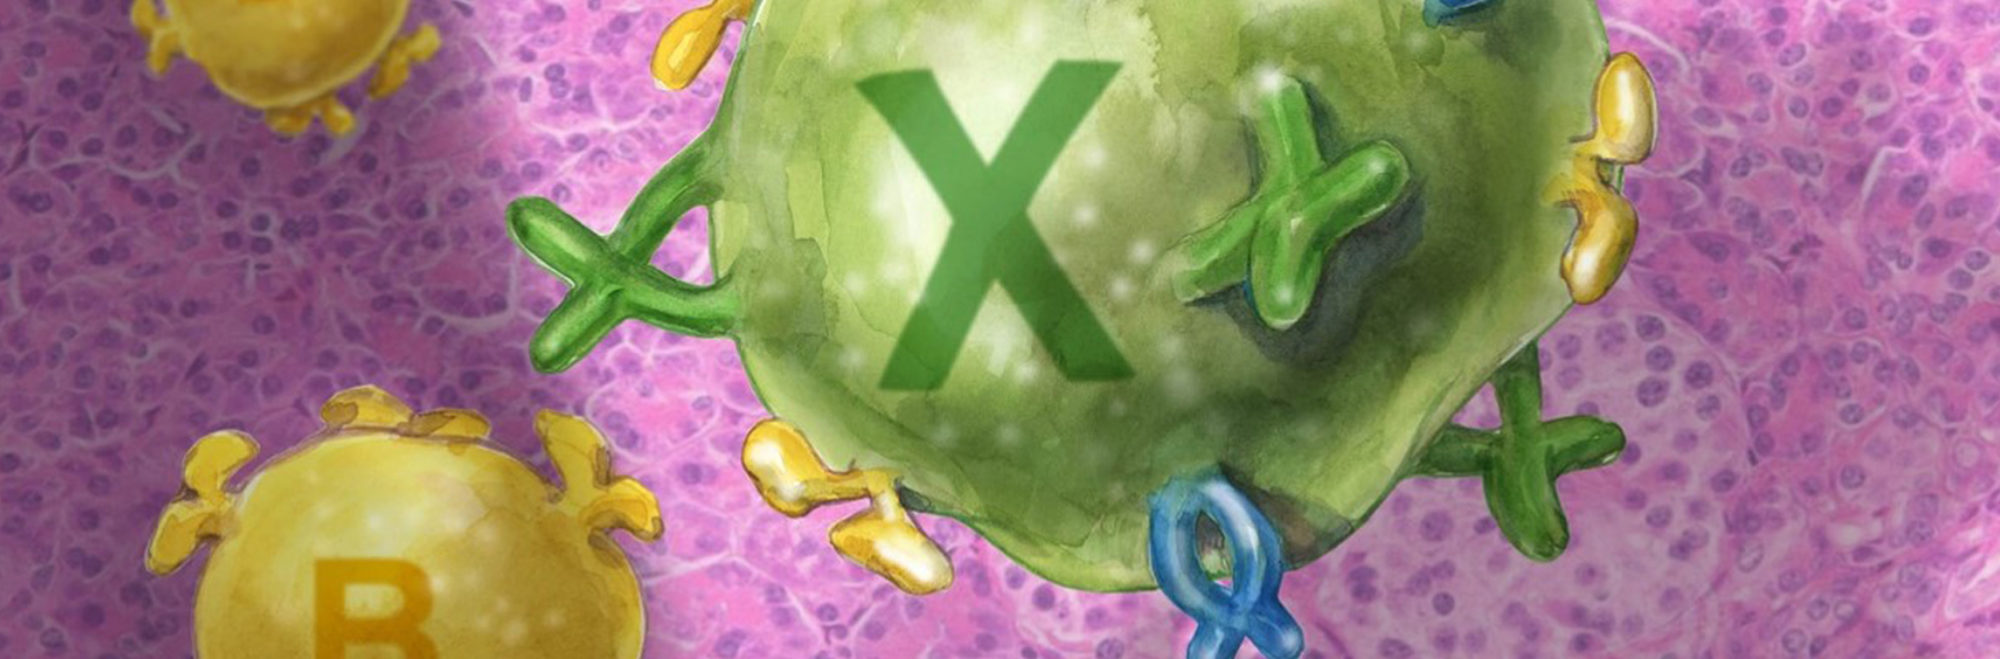 X Cell